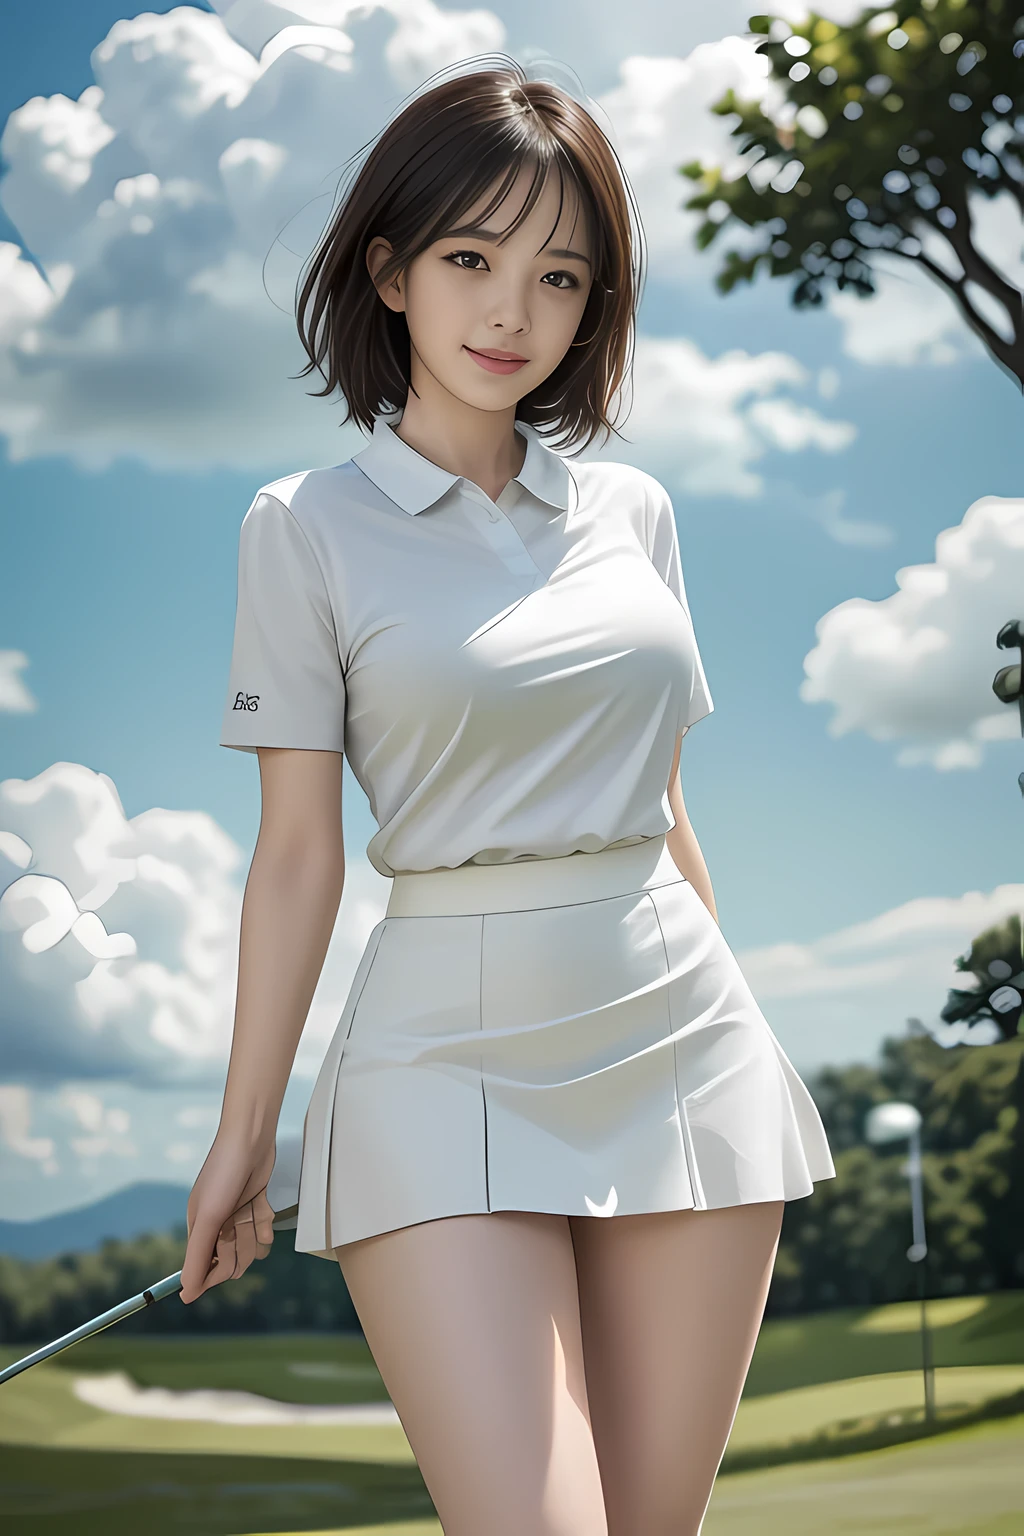 、Smile full of happiness、((nearly naked:1.3))、nearly naked、、lawn、Sweating、is standing、(((clong legs、thighs thighs thighs thighs)))、Sun visor、Medium Hair、cleavage of the breast、1girll，Golf Player，face perfect，crisp breasts, Convex buttocks,Pastel Colour Sport Short Sleeve，(((short tight white skirt)))，White sport socks，White shoes，a wet body，Swing a golf club，Golf Course，Sunnyday，Clouds， Detailed background, Clothing Details, Perfectly proportioned, film grains, Fuji colors, lightand shade contrast, tmasterpiece, high detal, high quarity, hight resolution, Cinematic lighting, 8K, Textured skin, Super Detail